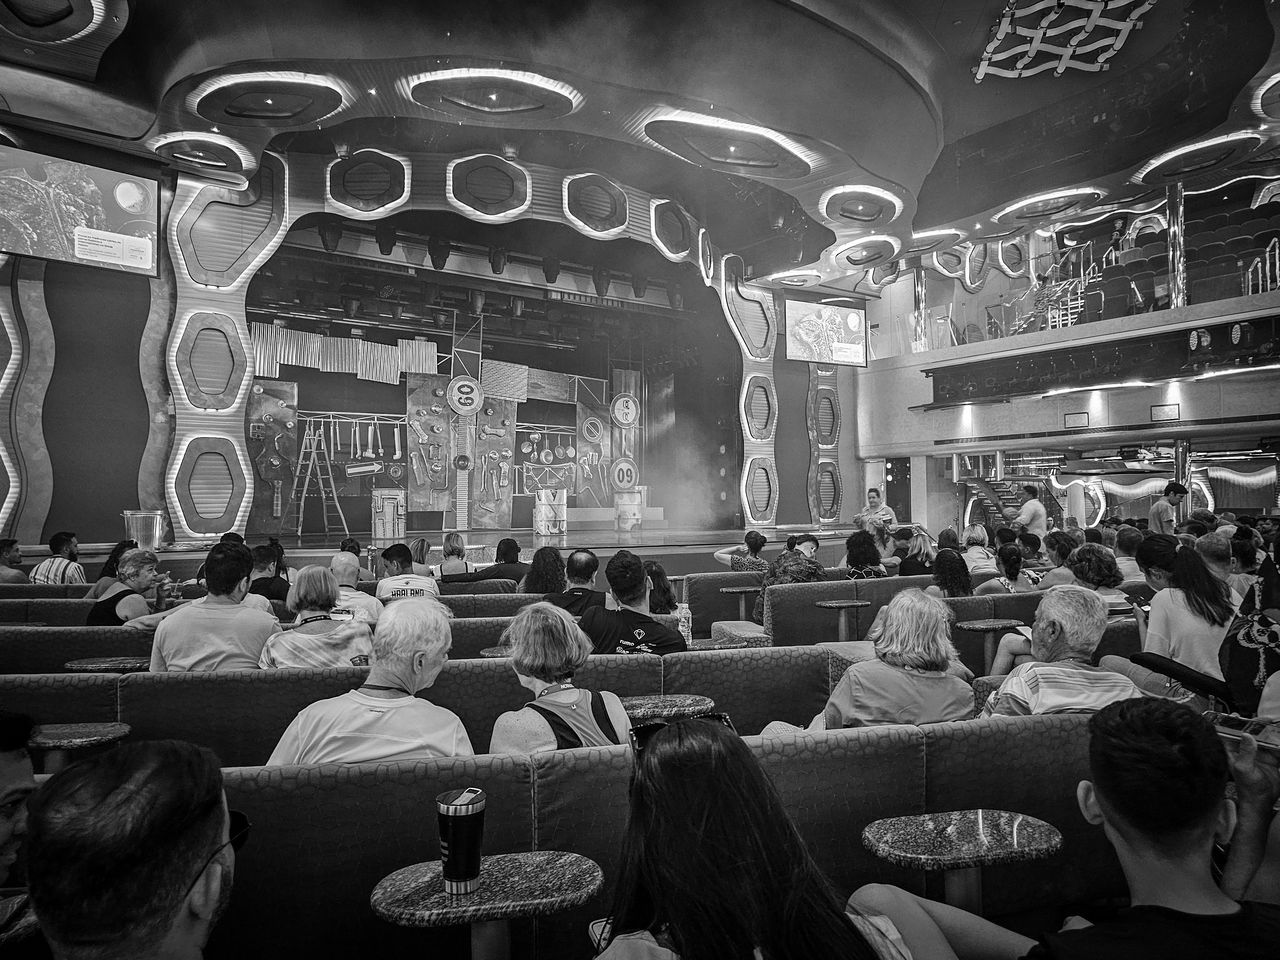 black and white, monochrome, crowd, monochrome photography, group of people, indoors, adult, architecture, black, women, large group of people, food and drink, men, lifestyles, sitting, business, restaurant, seat, arts culture and entertainment